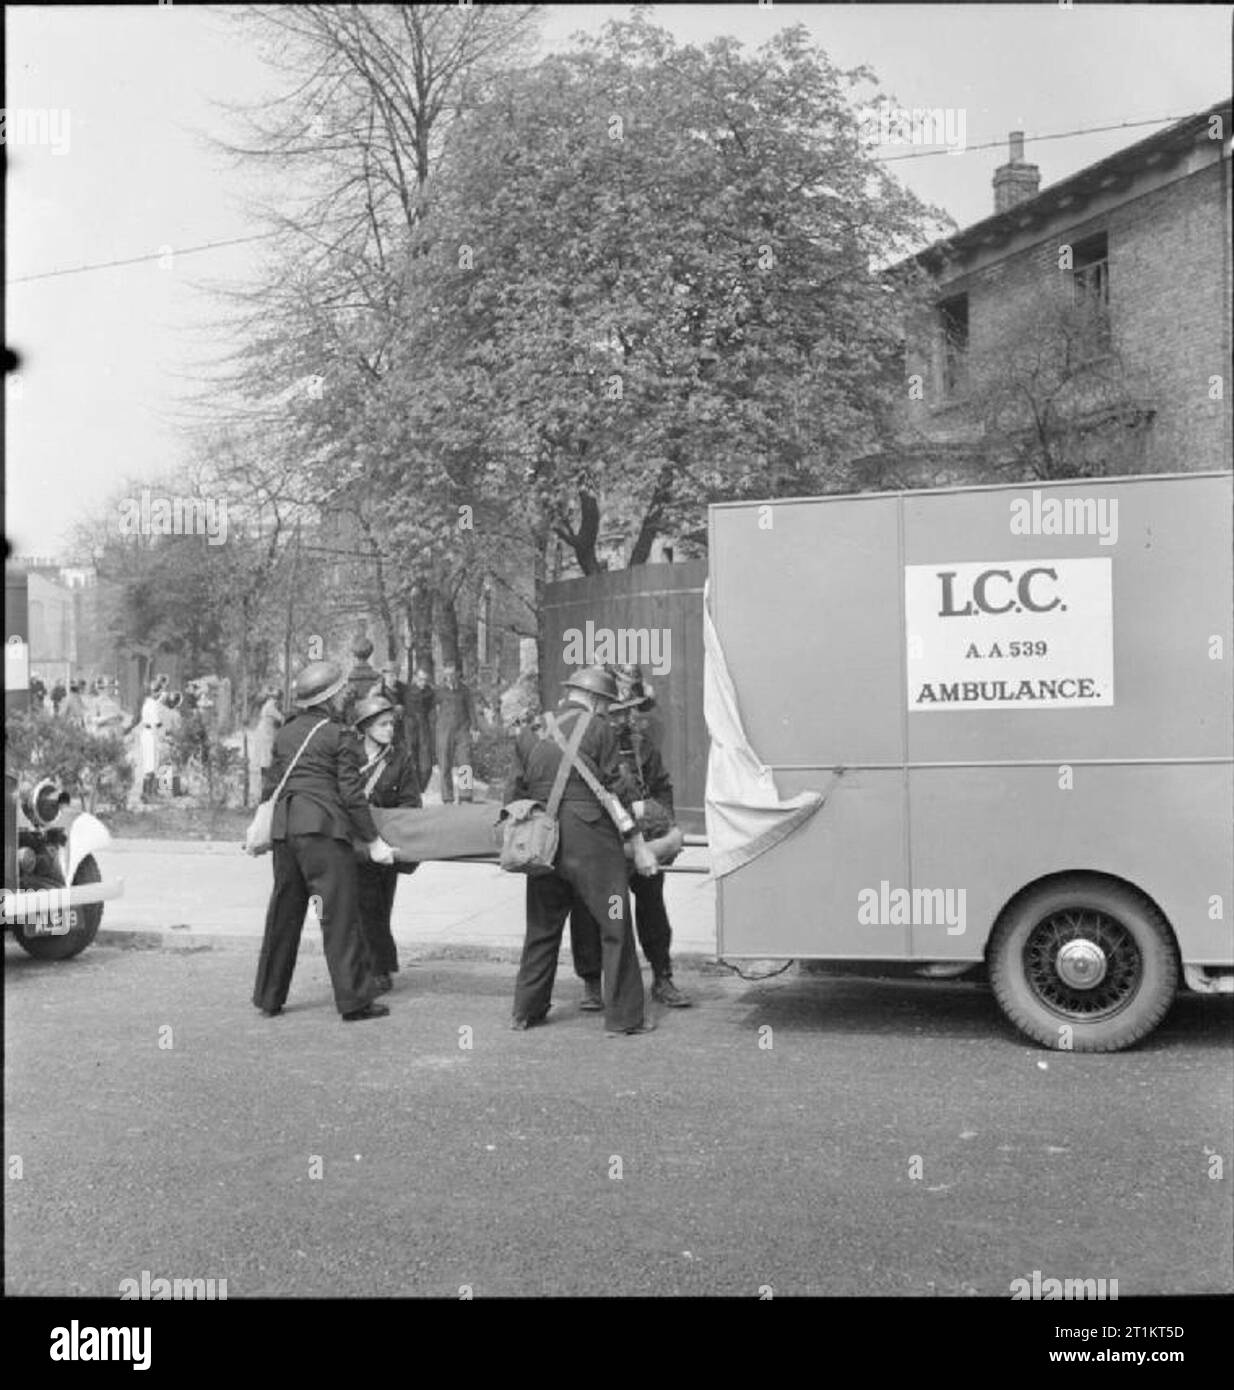 The Reconstruction of 'an Incident'- Civil Defence Training in Fulham, London, 1942 Female Ambulance drivers help men of the 'light rescue' stretcher party to load a stretcher case into an ambulance. A walking wounded case can be seen in the background as he is guided to an ambulance car parked further up the street. This photograph was taken on West Cromwell Road/Conan Street, looking back down Edith Villas. The Mobile Medical Unit is just visible to the left of the photograph. Stock Photo